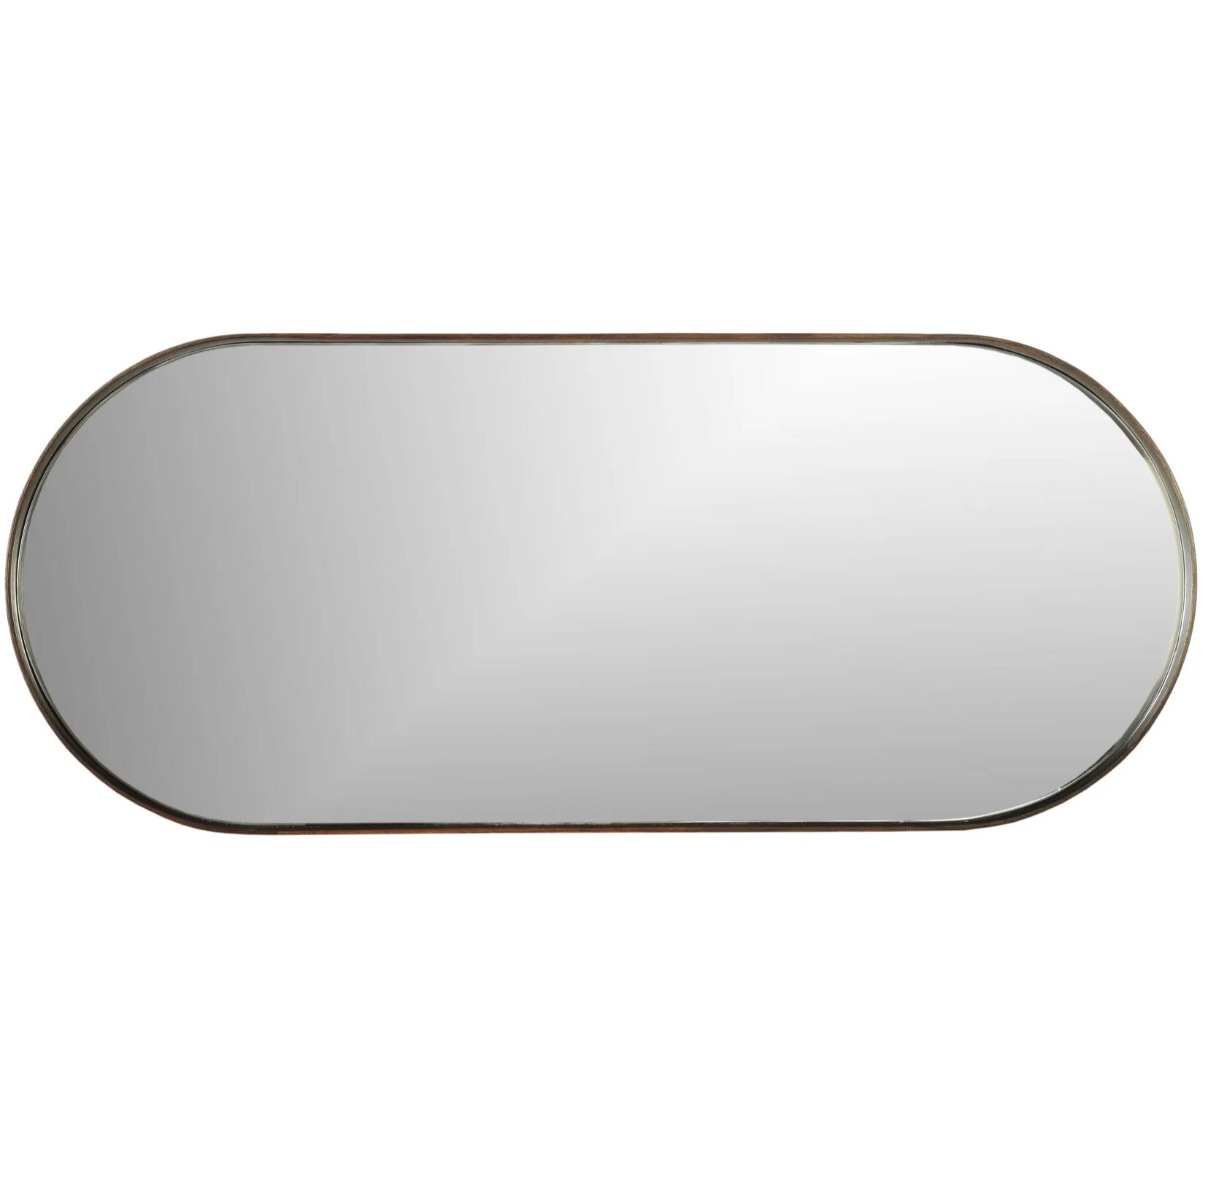 Small Oval Mirror